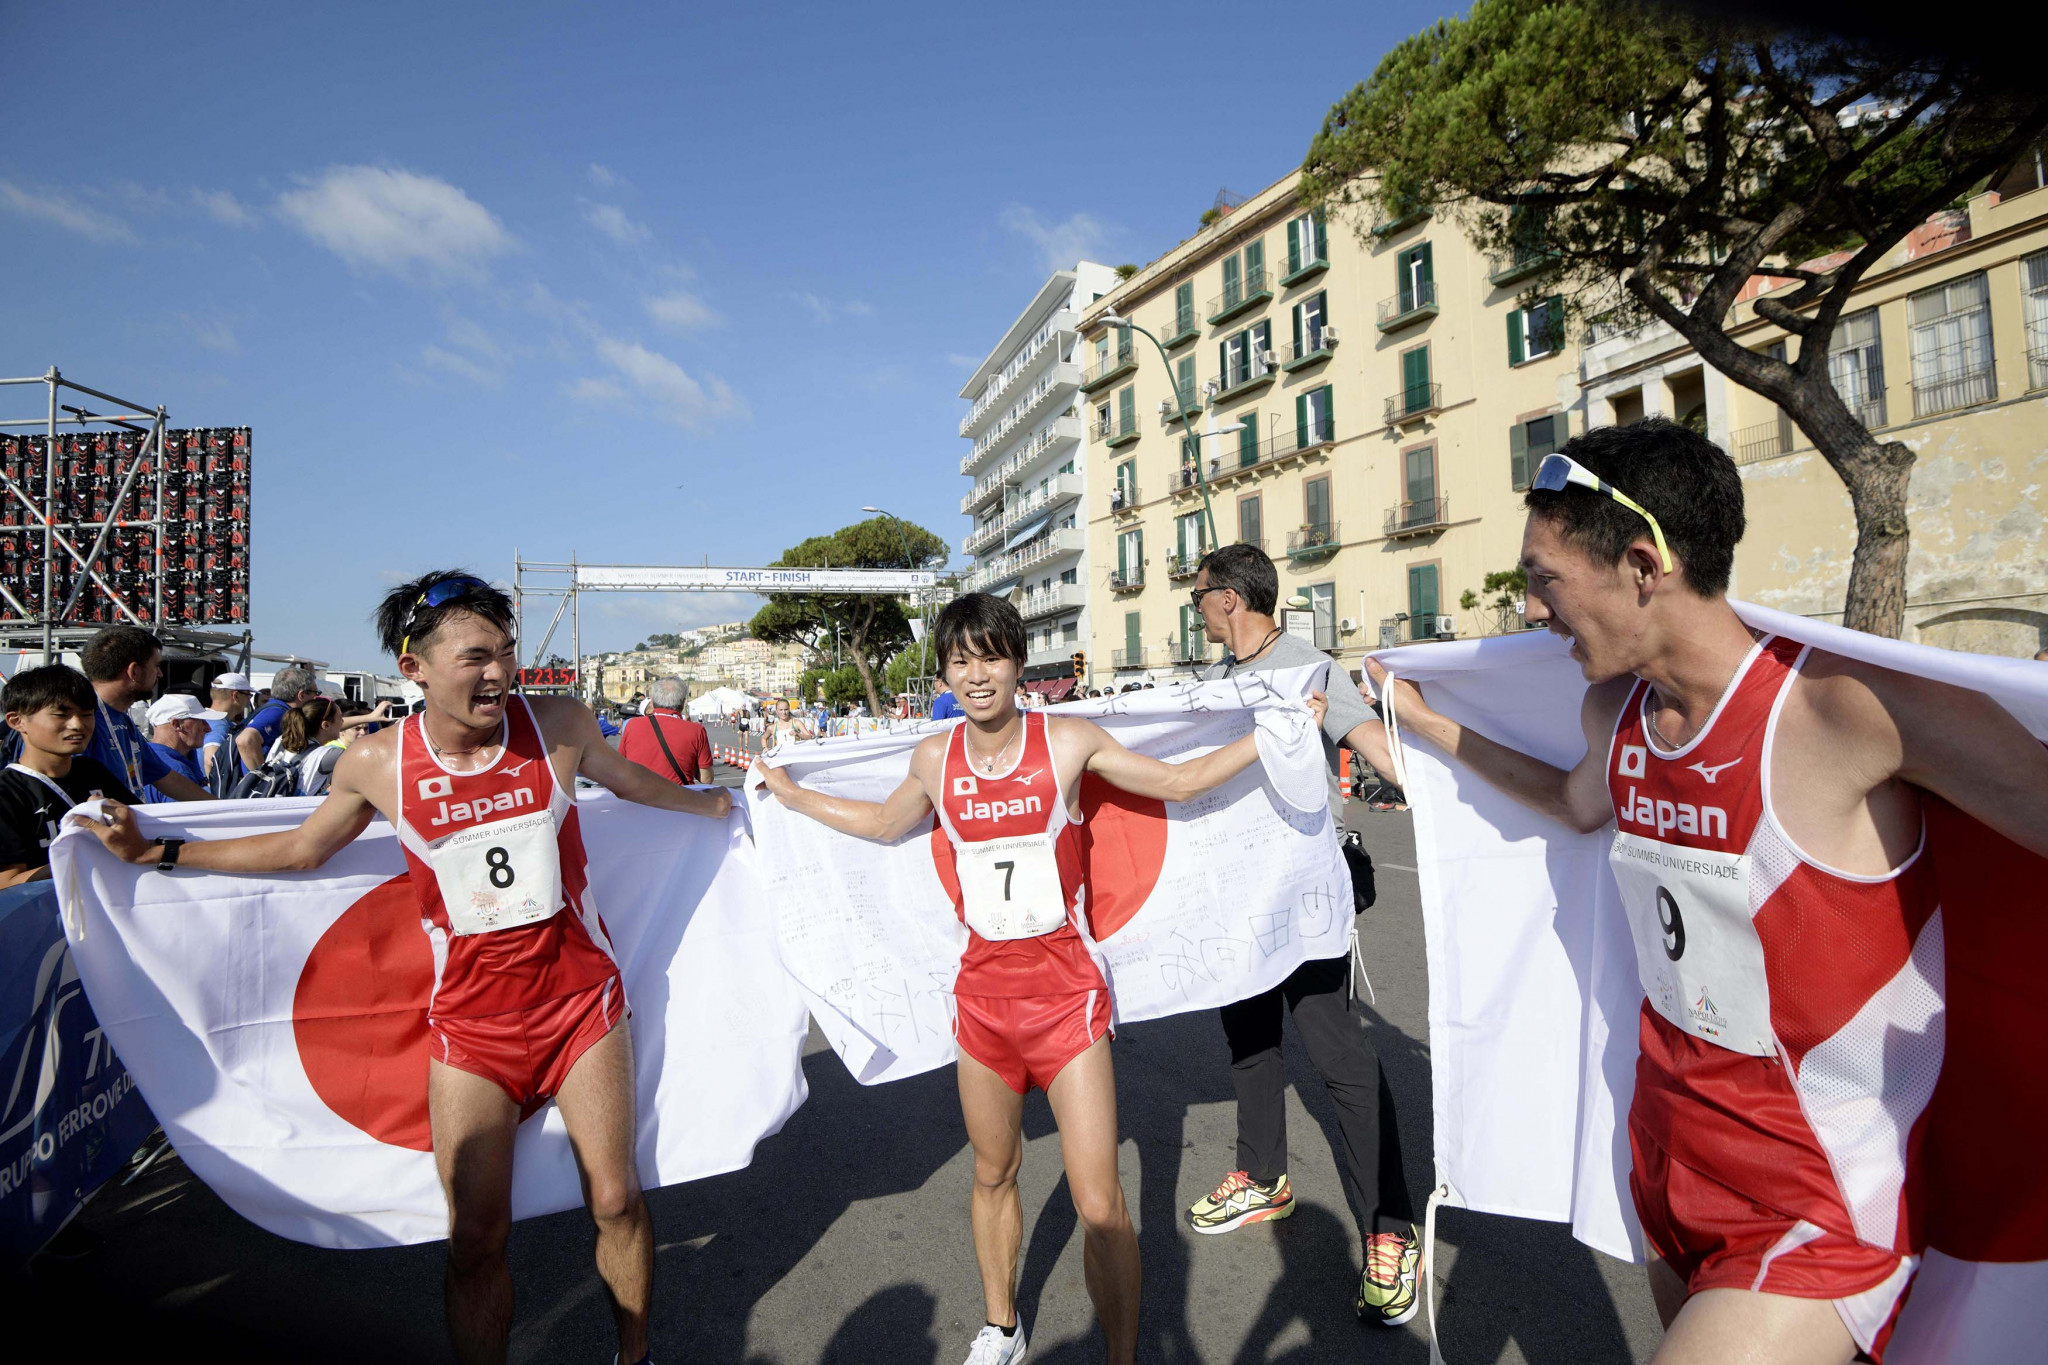 Japanese athletes were first, second and third in the men's 20km race walk ©Naples 2019